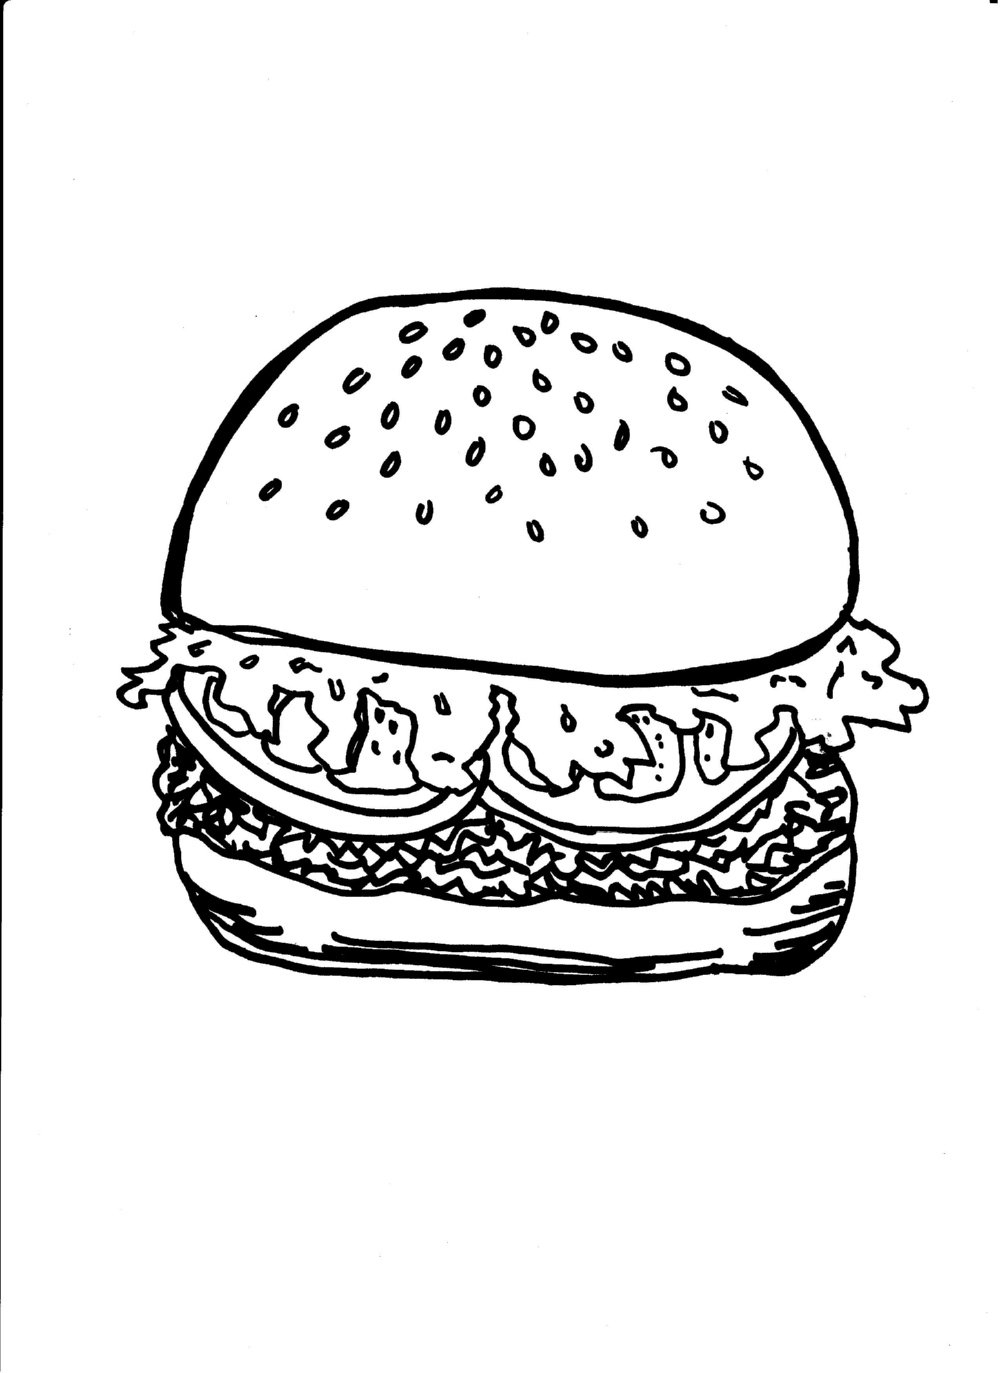 Unhealthy Food Coloring Pages - Get Coloring Pages